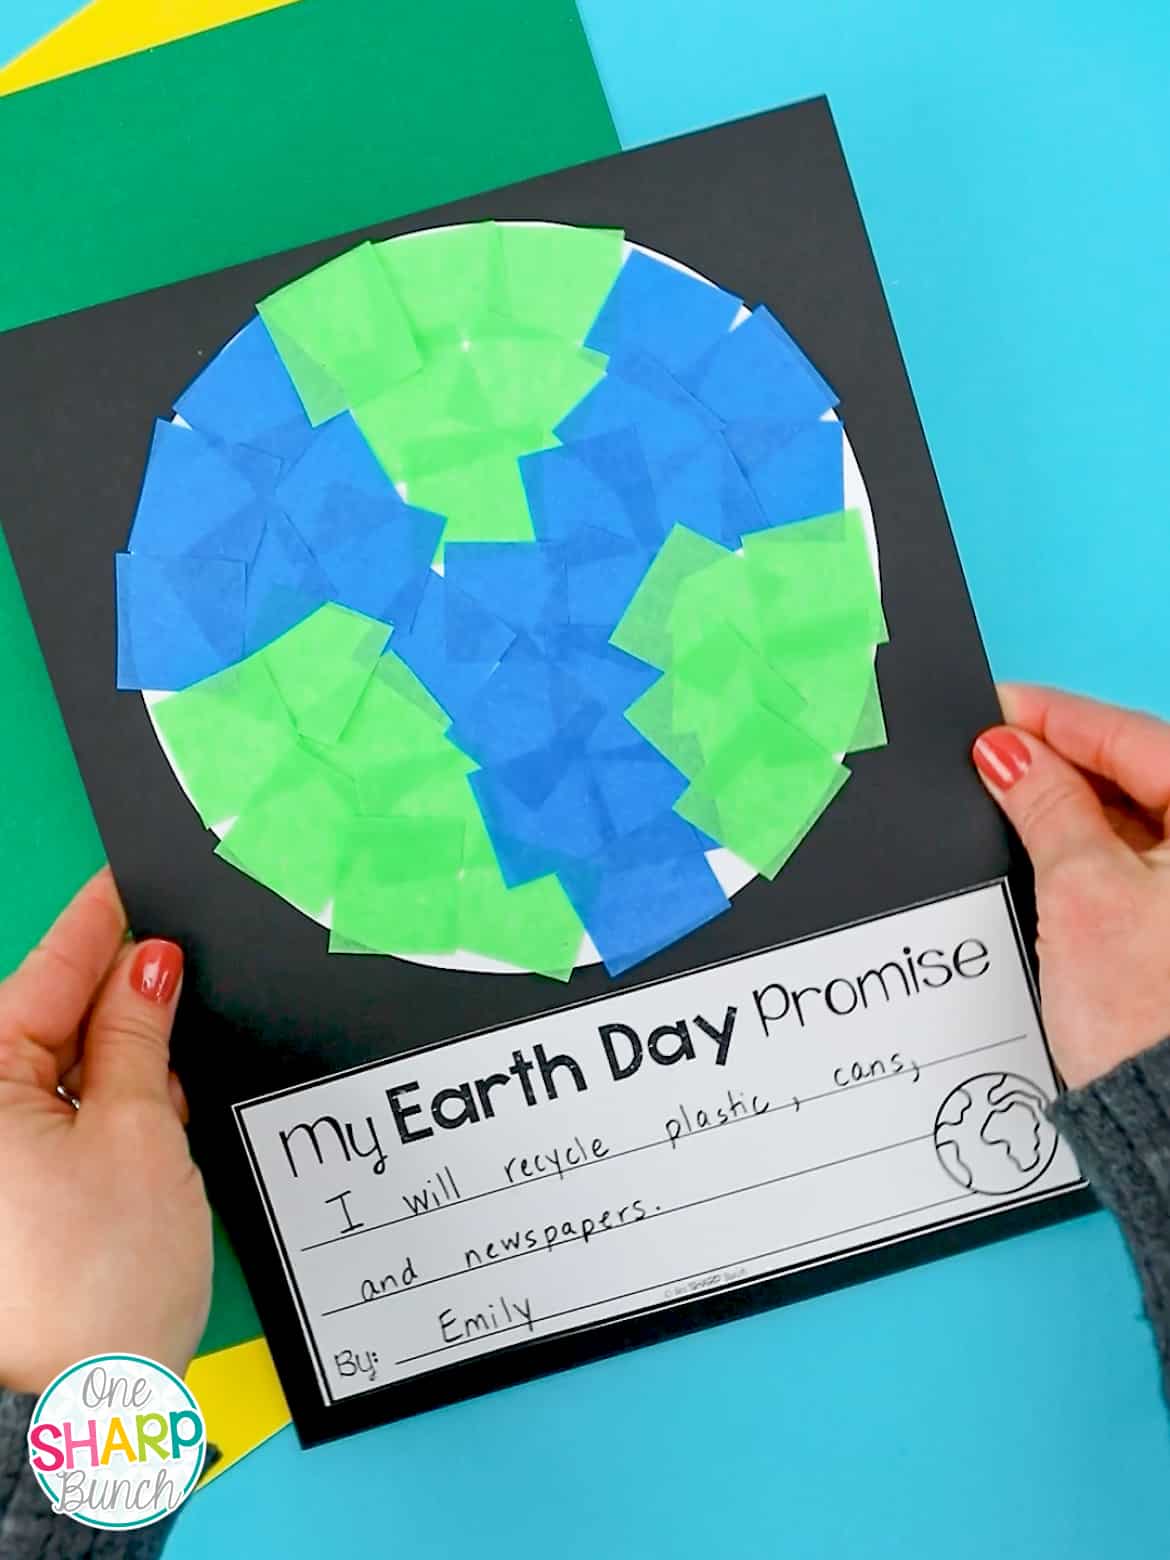 Pair this tissue paper Earth Day craft mosaic for kids with your favorite Earth Day books and Earth Day activities! This Earth craft is simple enough for kindergarten, and even, preschool students. Add an "Earth Day Promise" to the craft with the FREE writing prompt! #preschool #kindergarten #firstgrade #earthday #craftsforkids #kidscrafts #teachers #springactivities #teacher